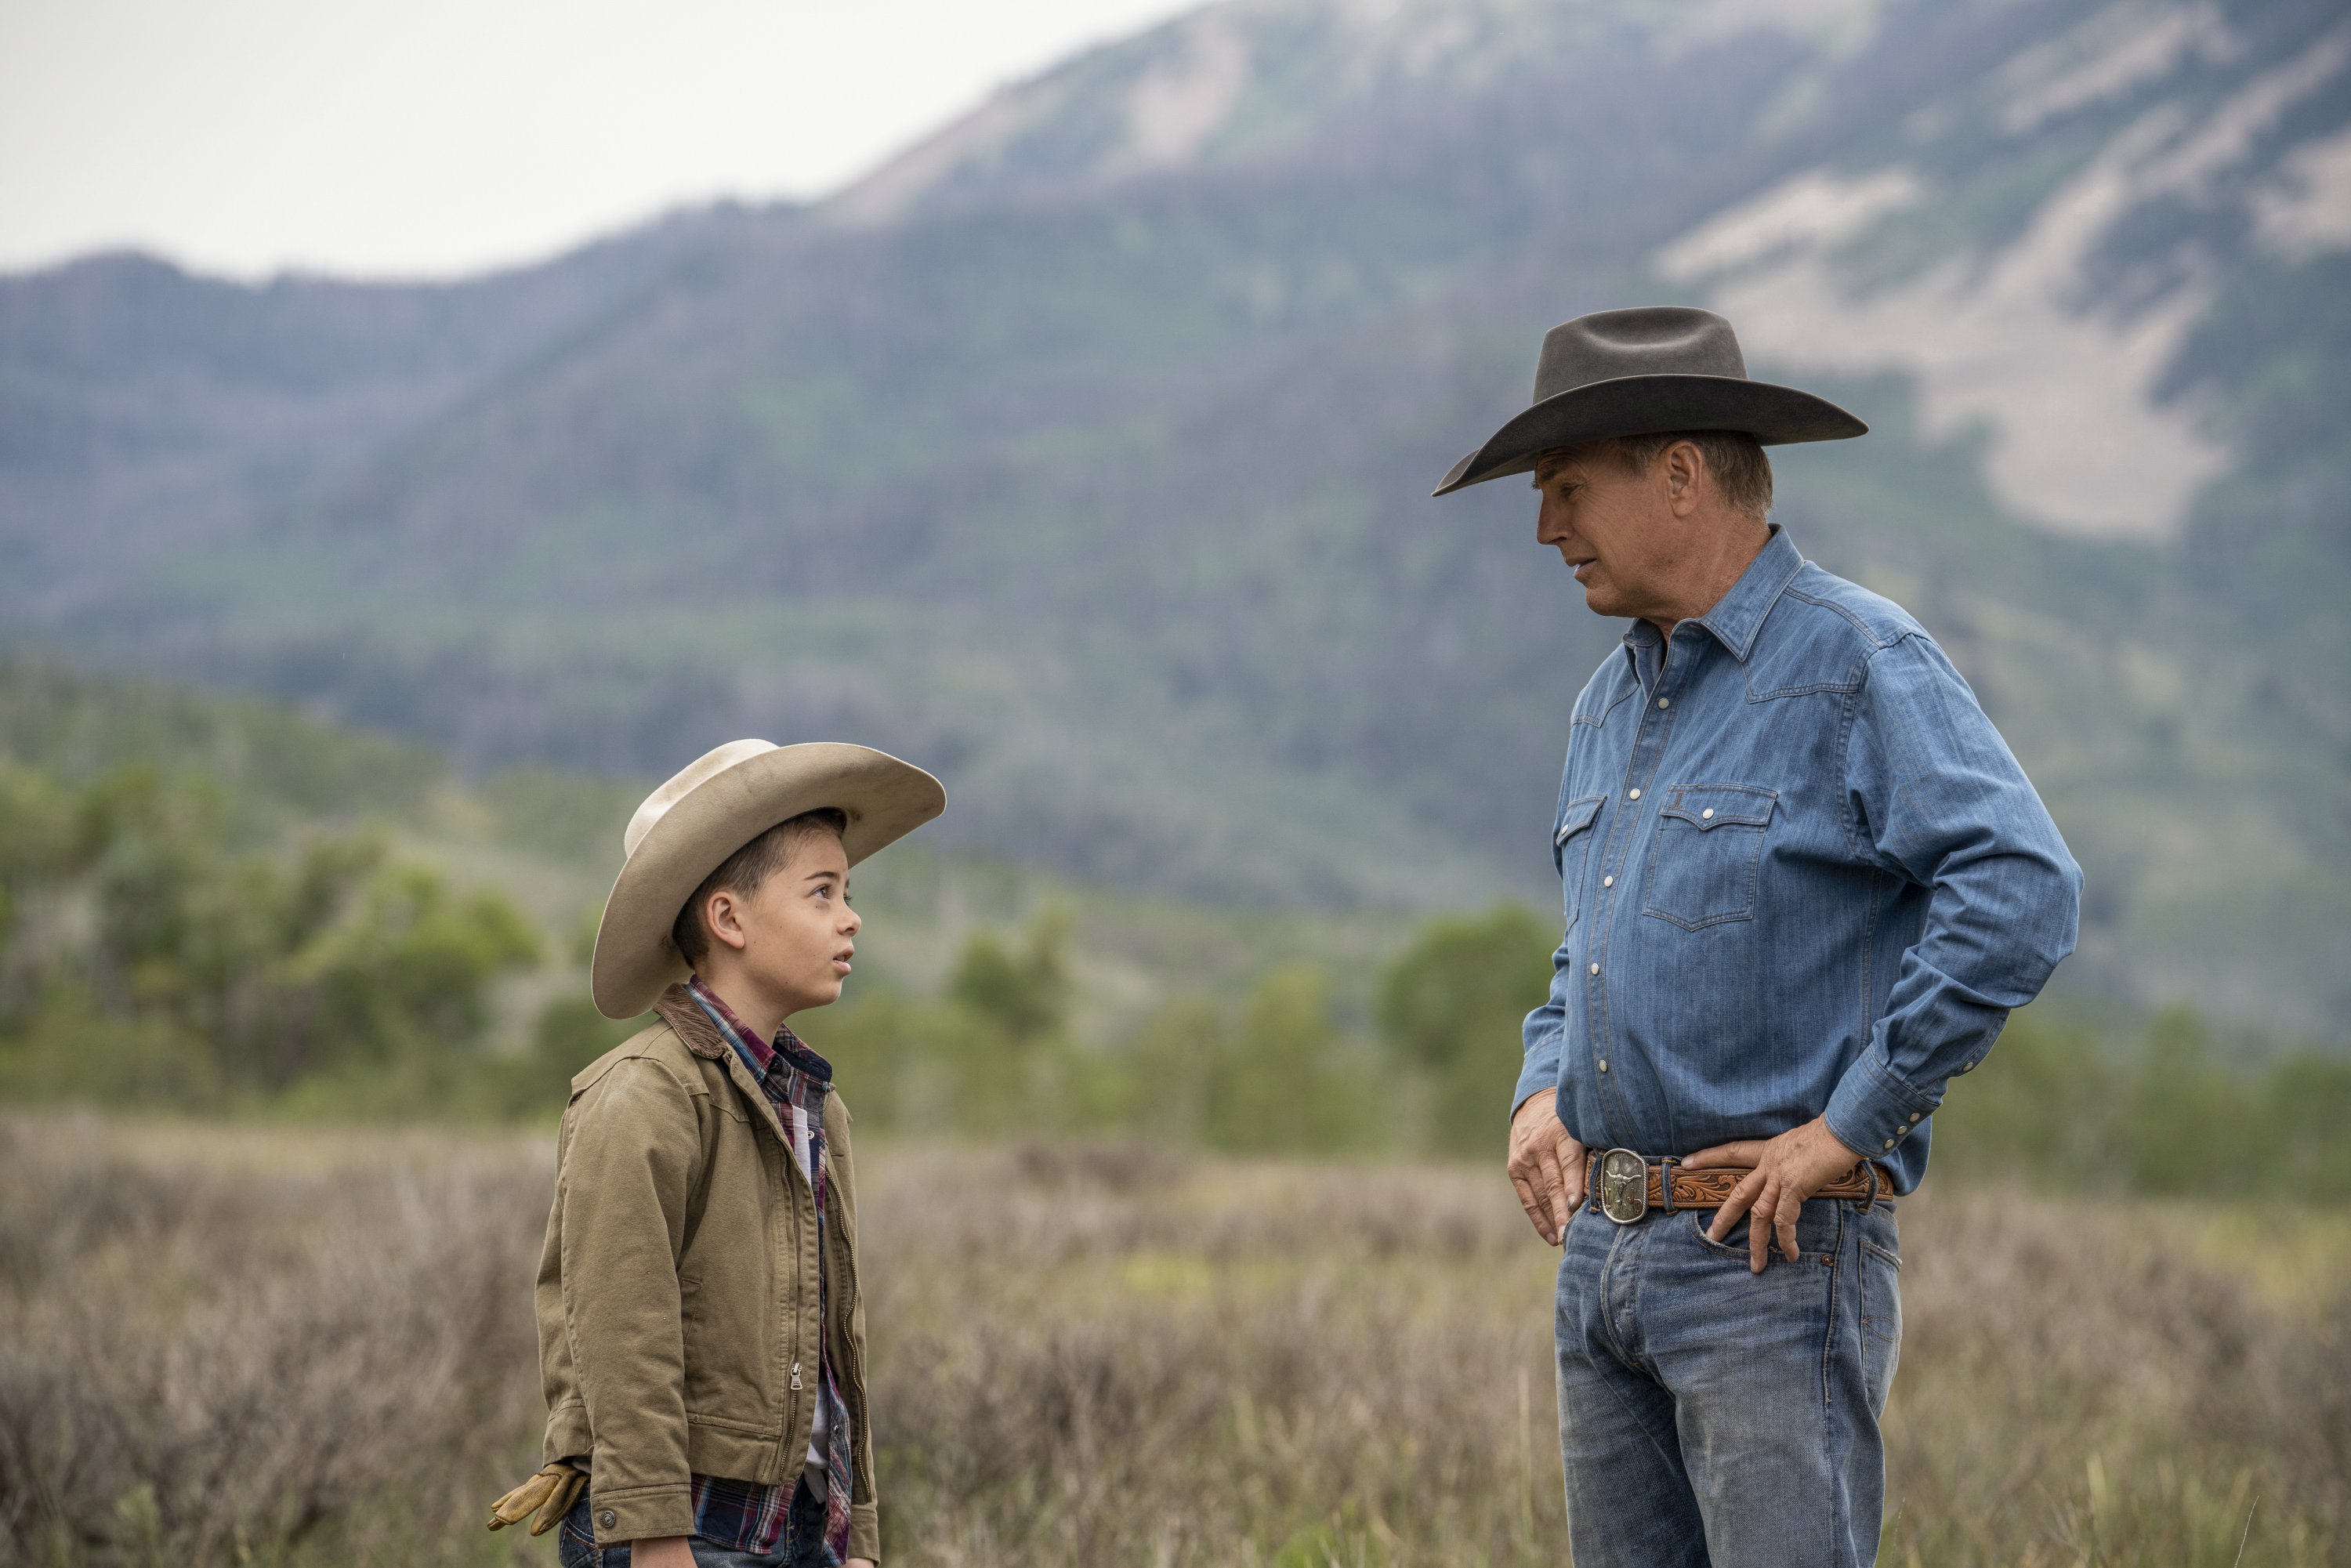 Yellowstone’s John and Tate wear cowboy hats and stand in tall grass, mountains in the background.